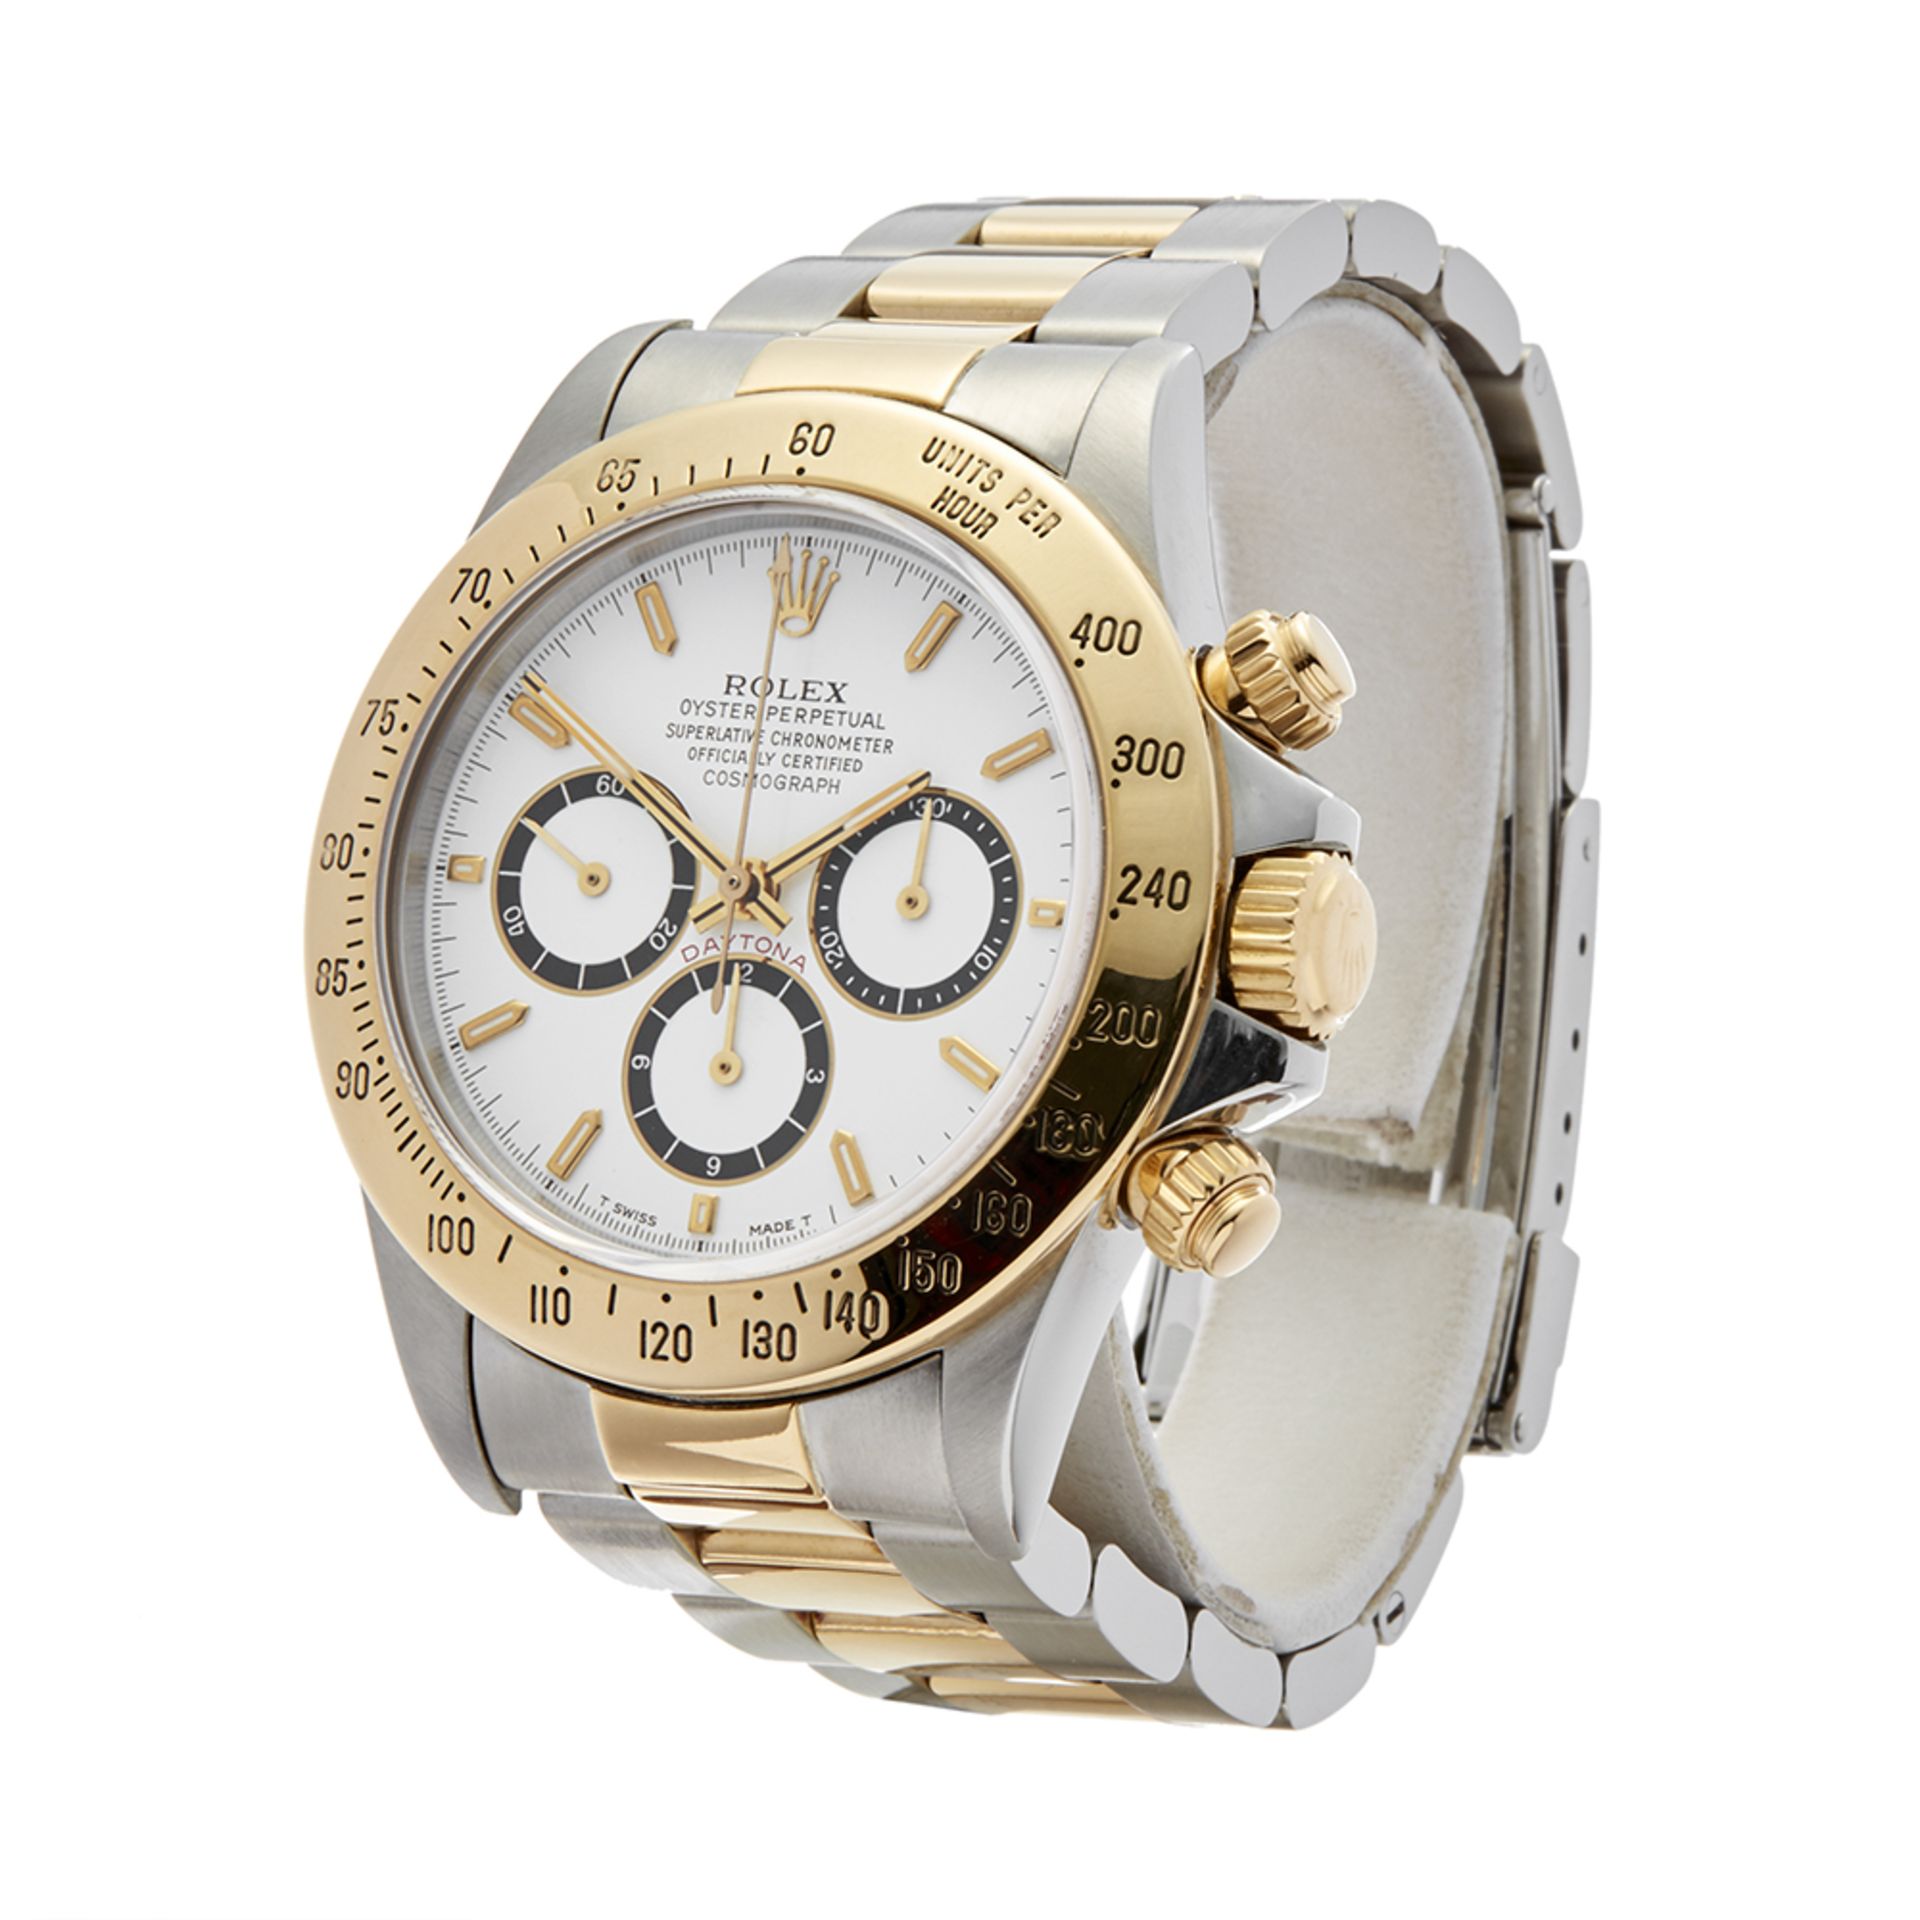 Rolex Daytona Chronograph Inverted 6 40mm Stainless Steel & 18k Yellow Gold - 16523 - Image 3 of 7